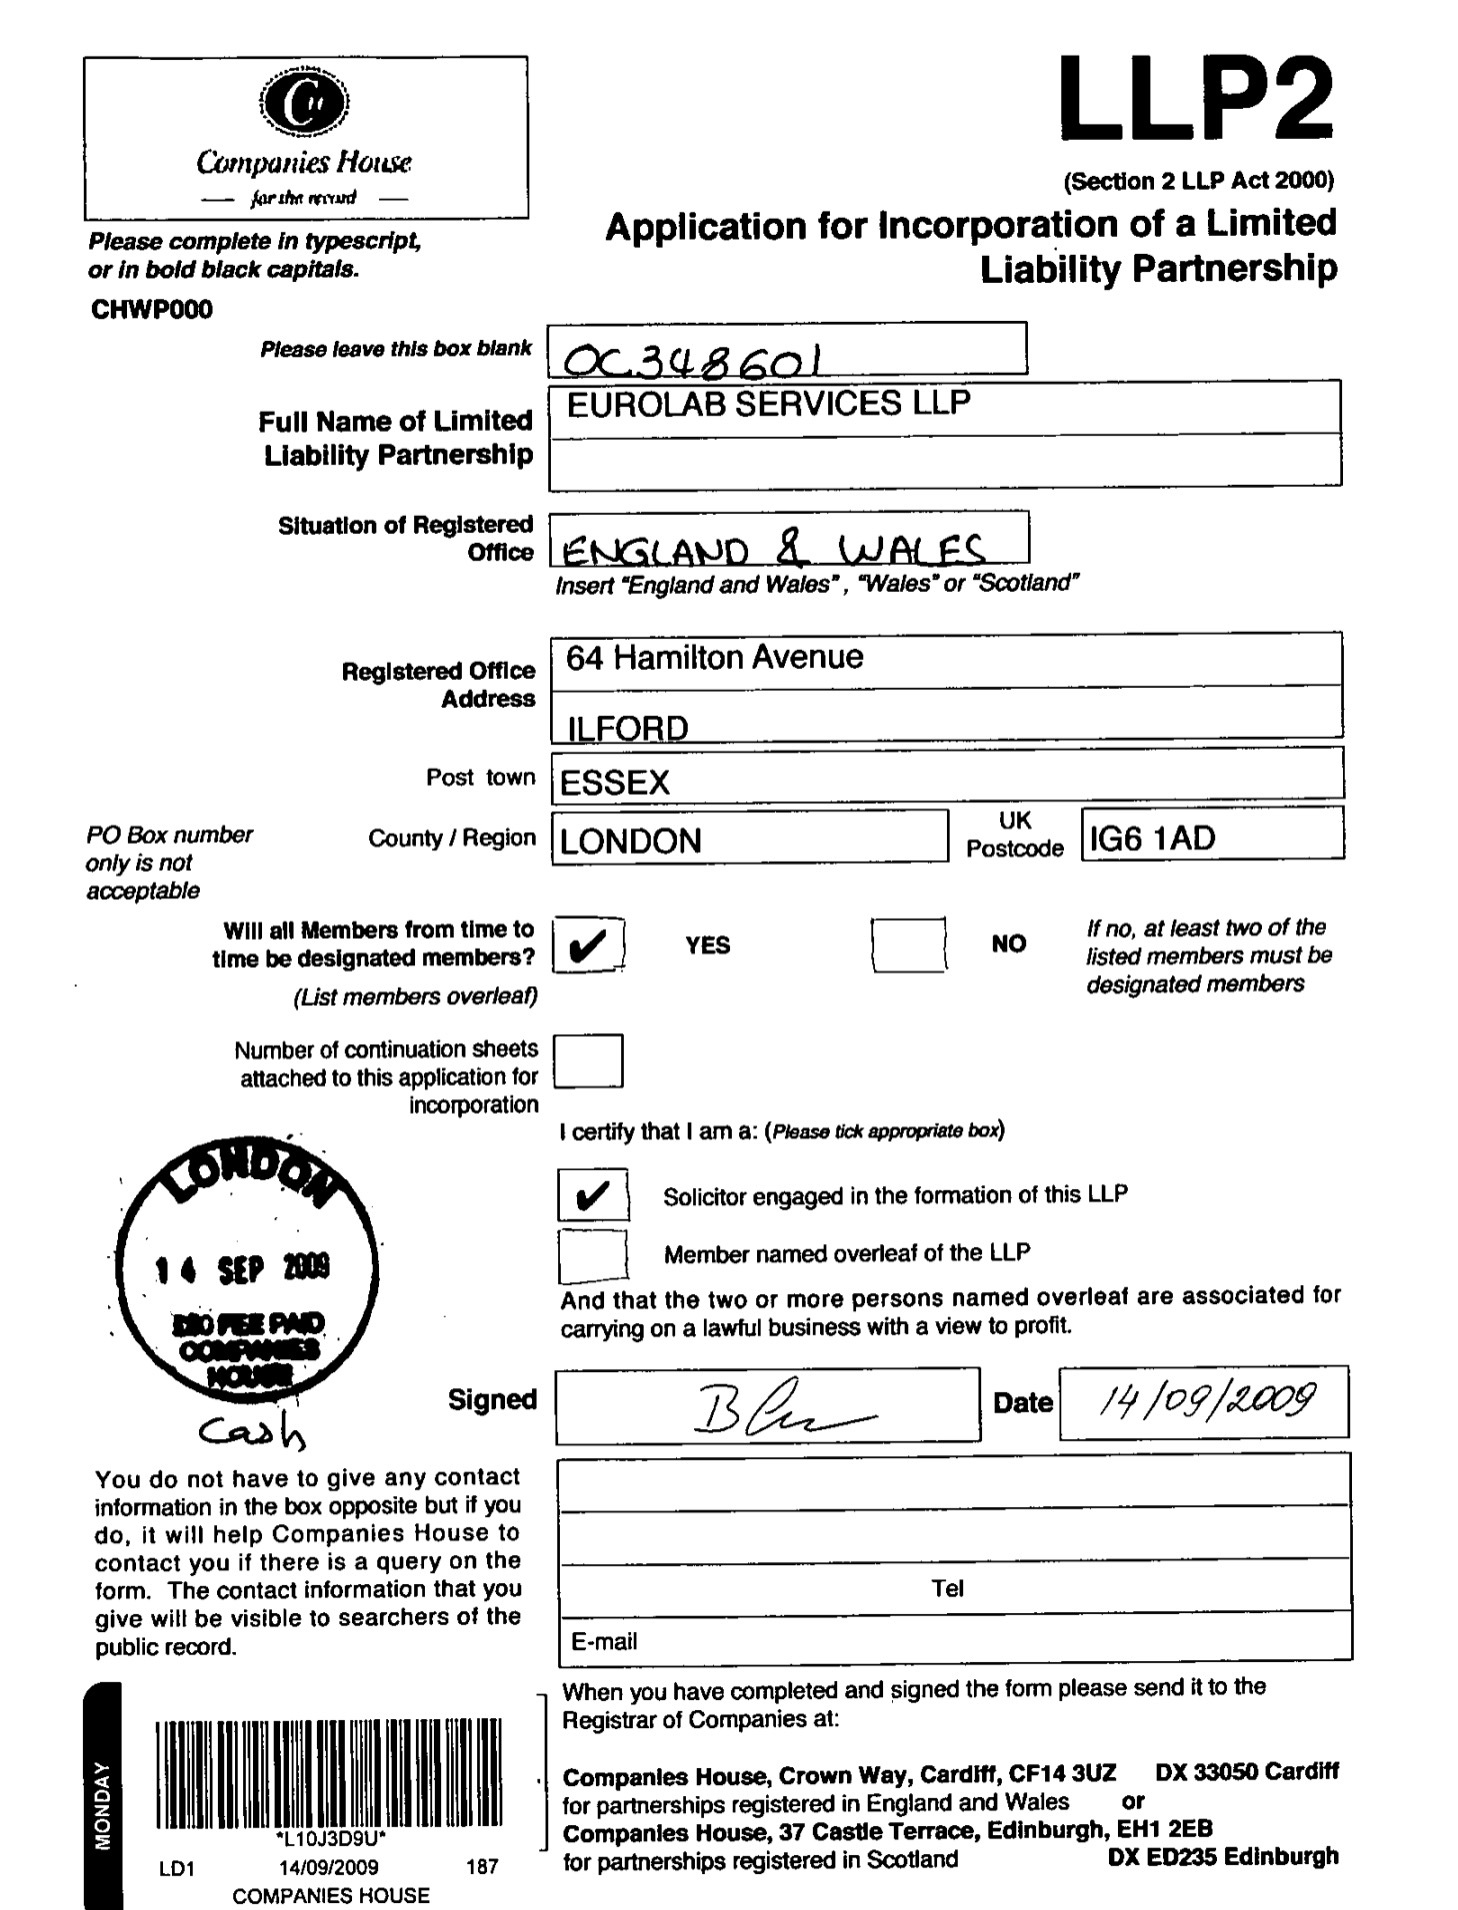 Dozens of official documents show that U.K. companies linked to or owned by Andriy Palchevsky, such as Eurolab Services LLP, are also tied to various Russian nationals, companies and are ultimately registered in Charlestown, Nevis, a well-known haven for tax avoidance and lax transparency in the Caribbean.